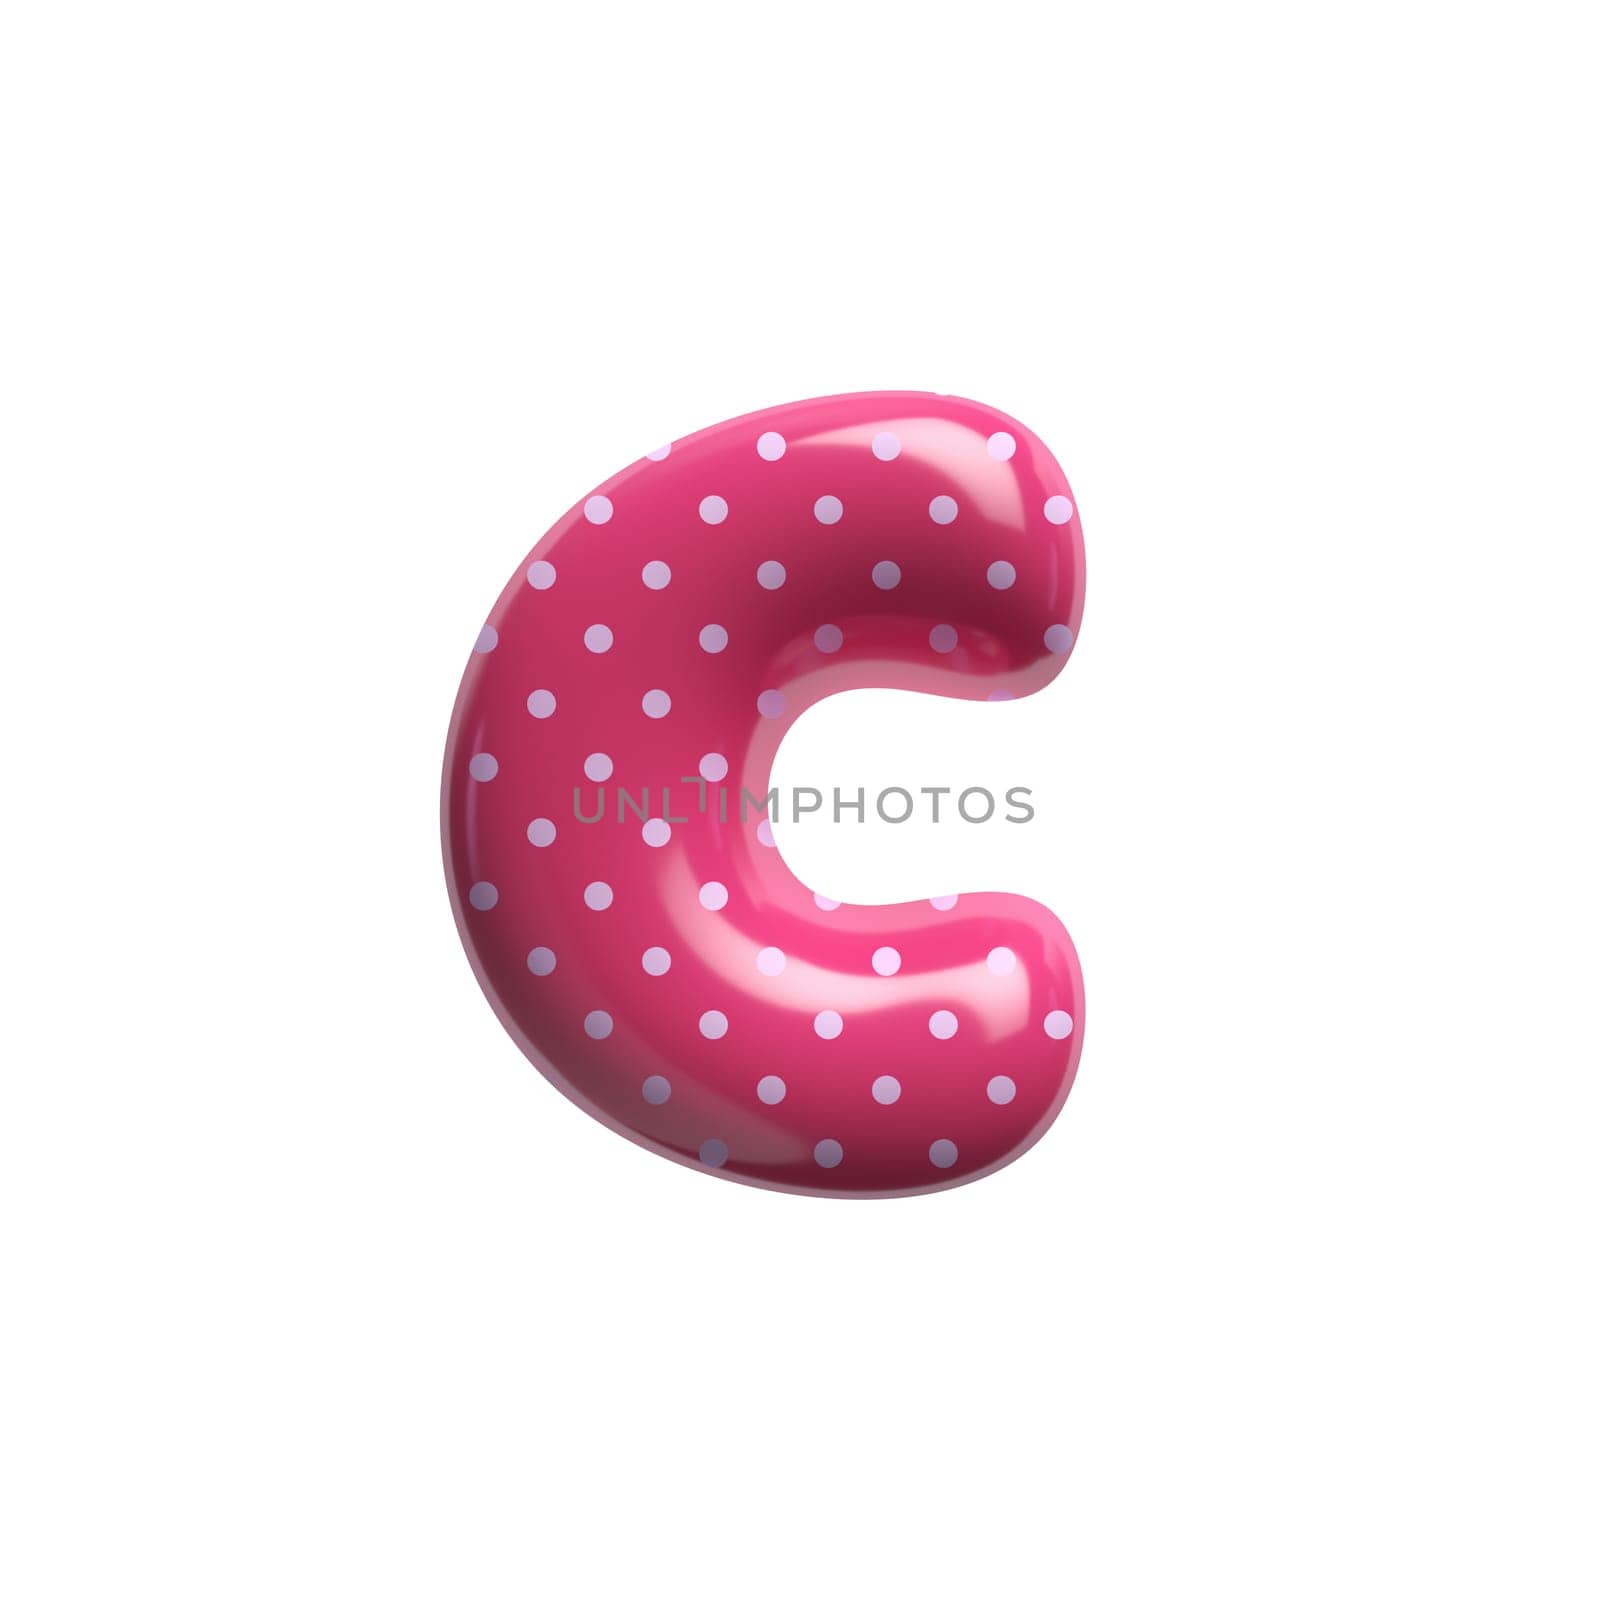 Polka dot letter C - Small 3d pink retro font isolated on white background. This alphabet is perfect for creative illustrations related but not limited to Fashion, retro design, decoration...